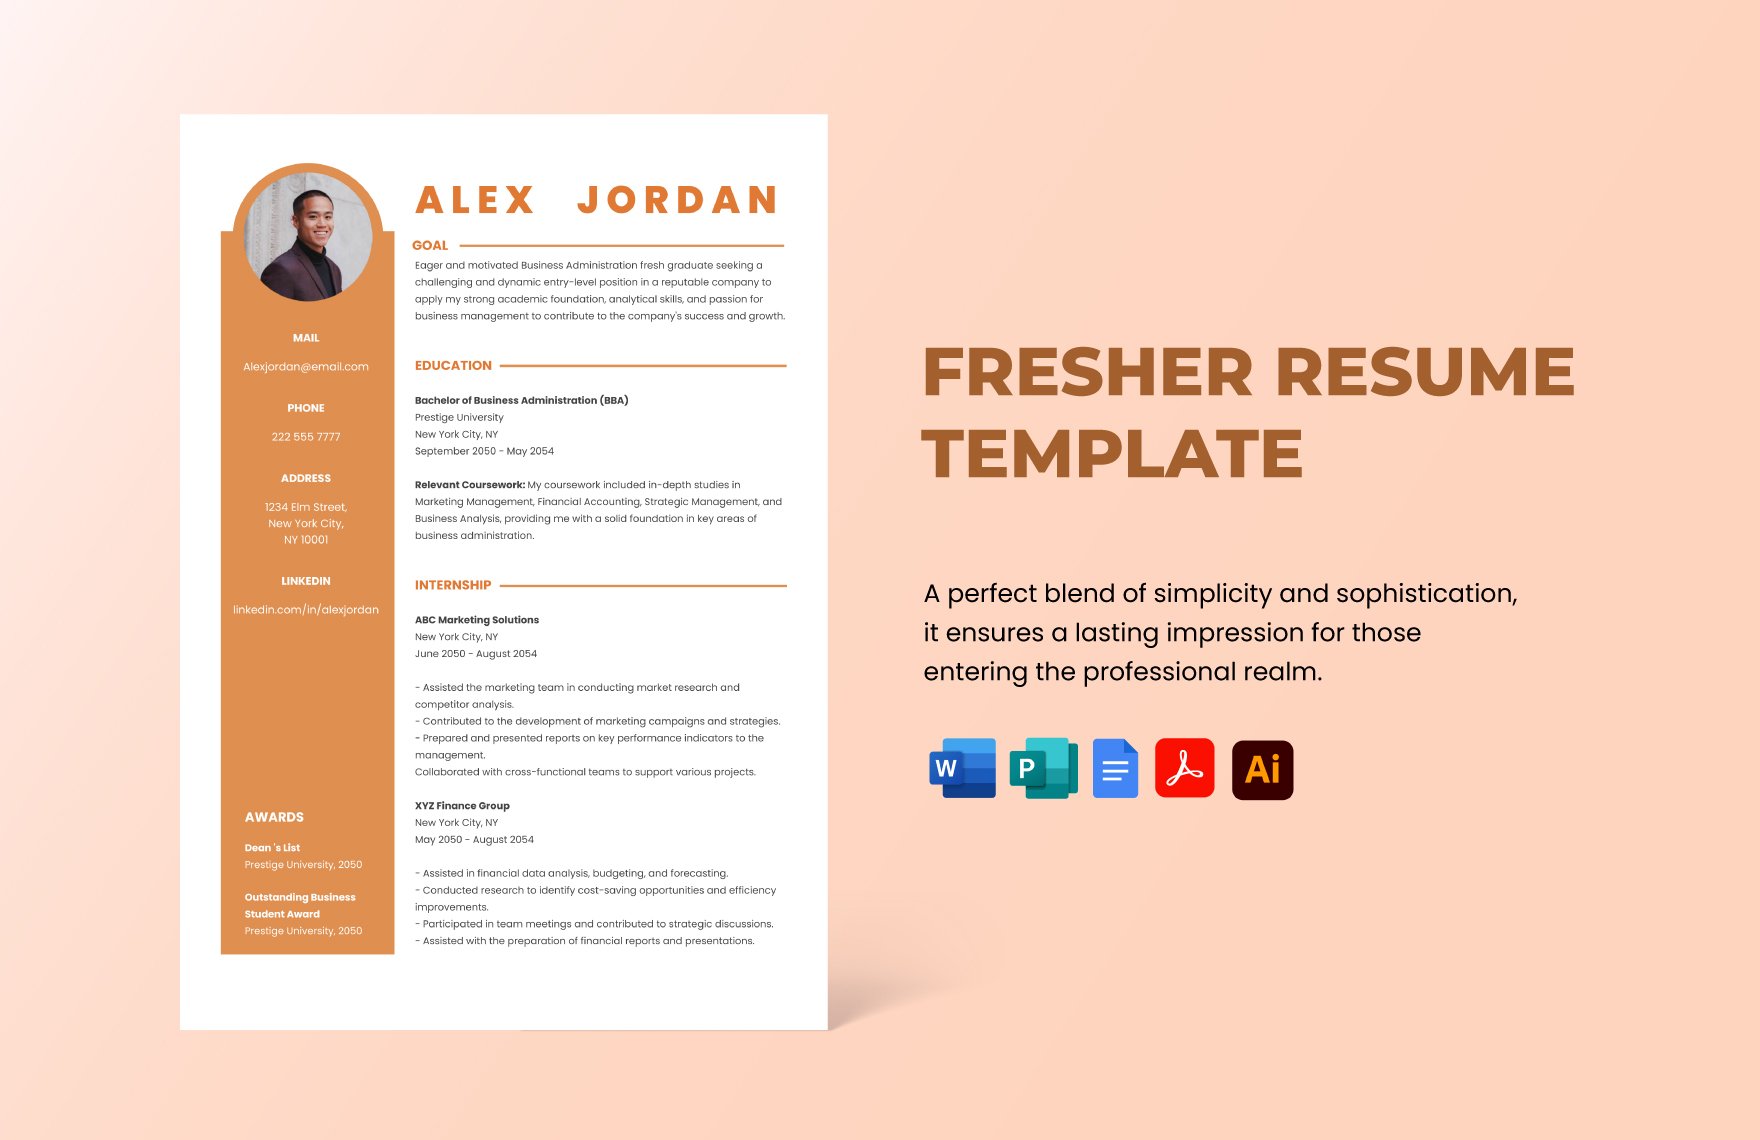 Free Fresher Resume Template in Word, Google Docs, PDF, Illustrator, Apple Pages, Publisher